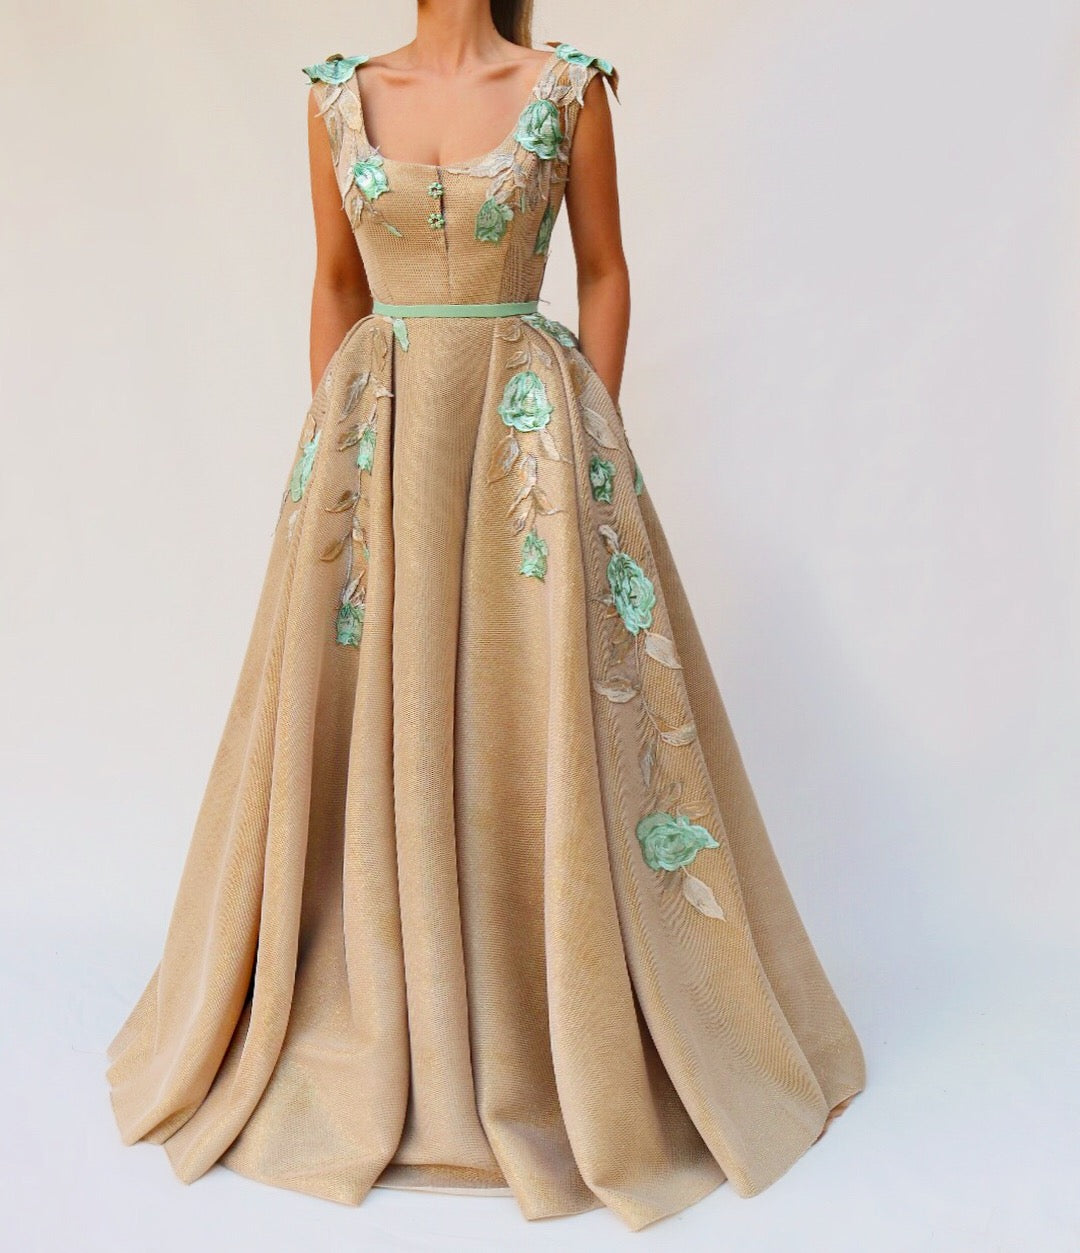 Gold A-Line dress with straps and embroidery